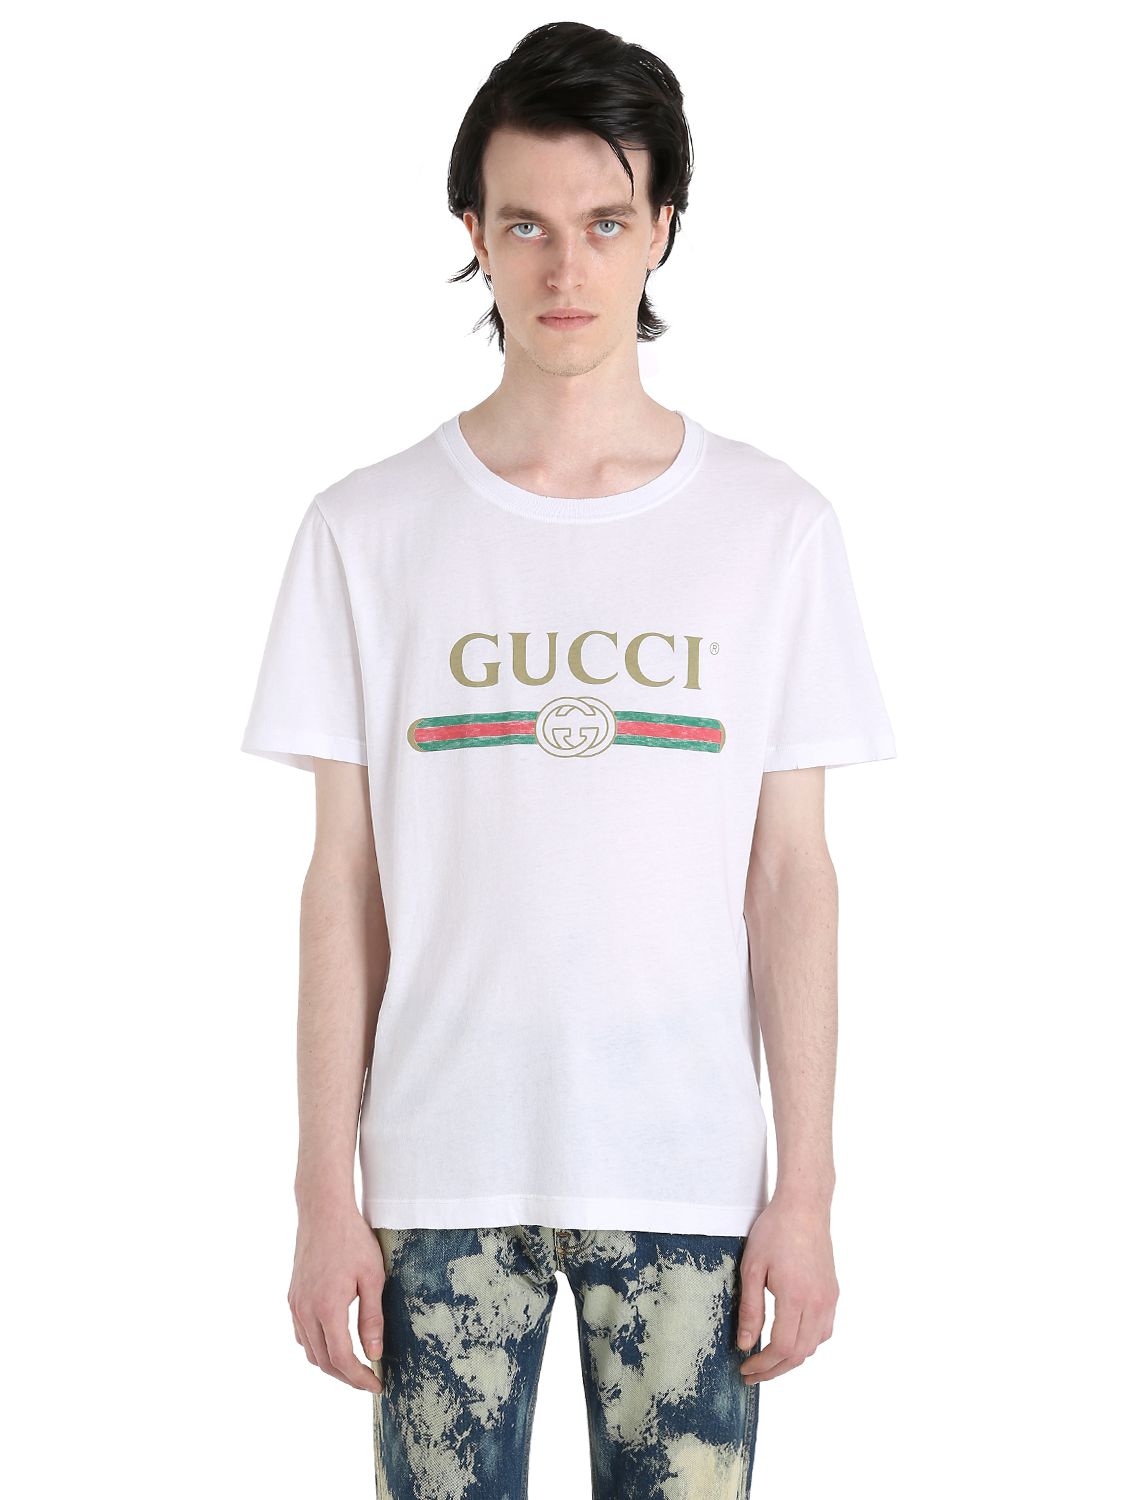 Room gucci t shirt made in turkey movies luxury